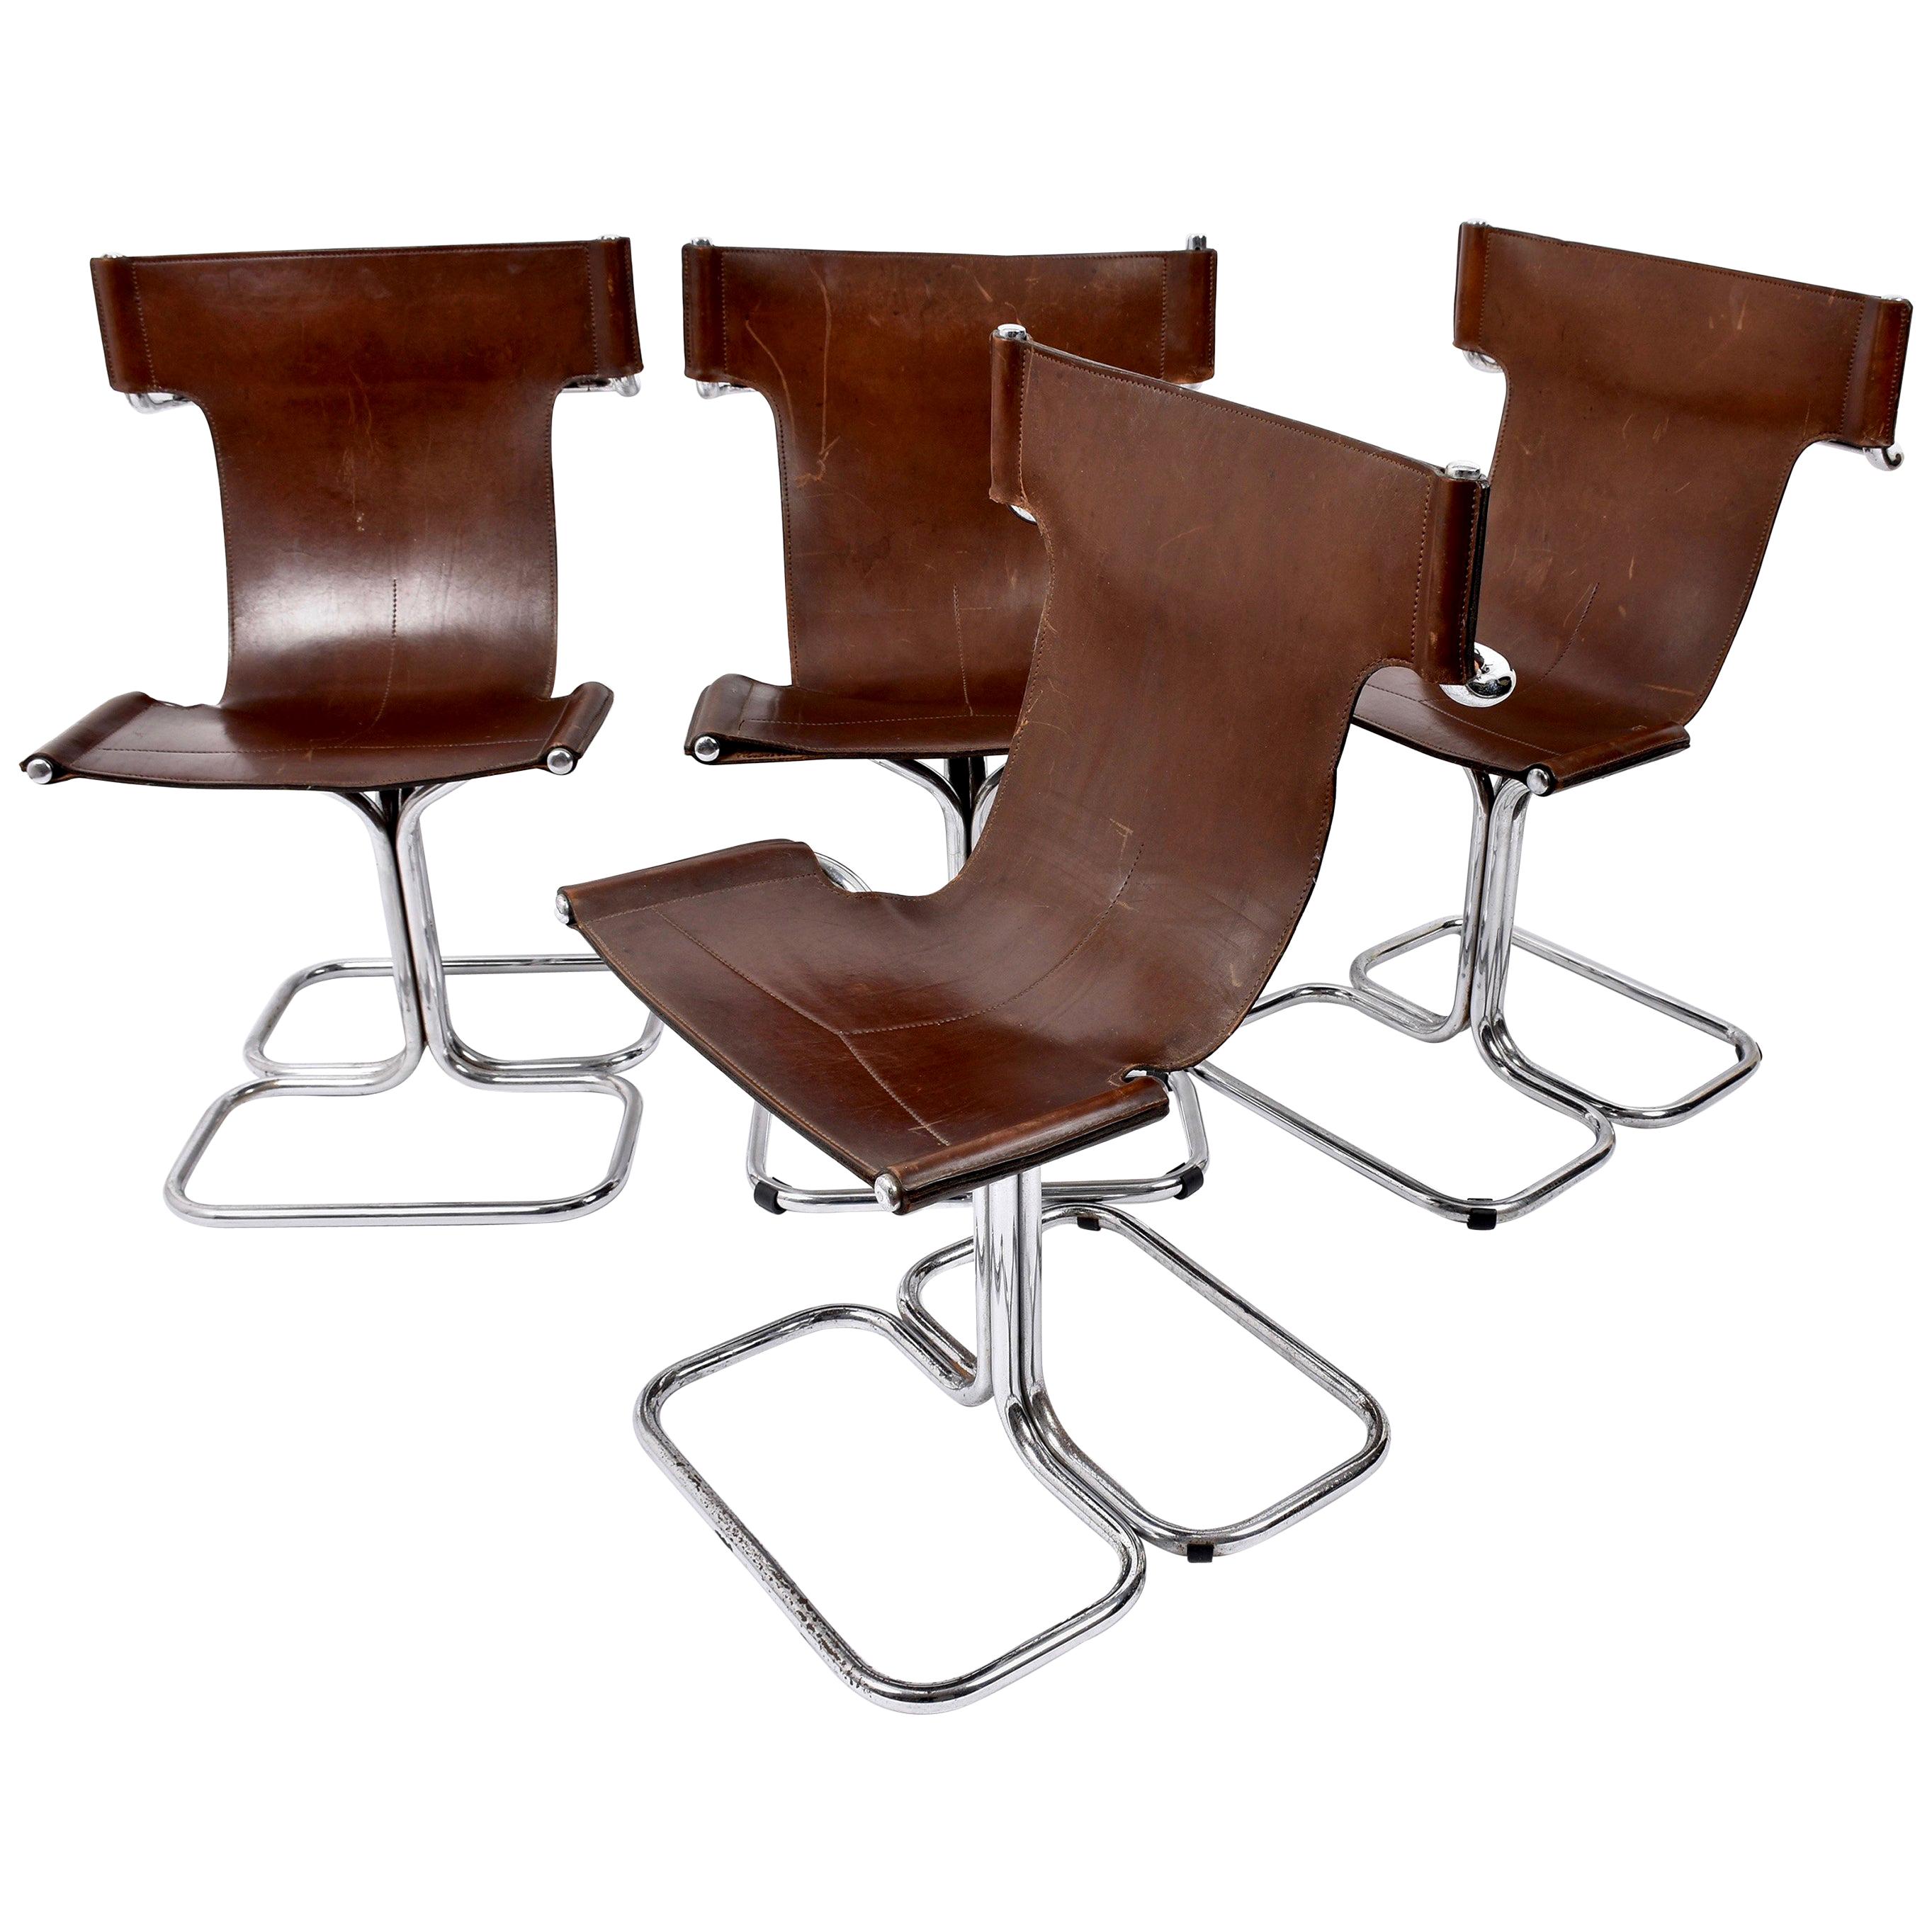 Faleschini, Set of Four Chairs, Chrome Leather Mid-Century Modern, Italy, 1970s